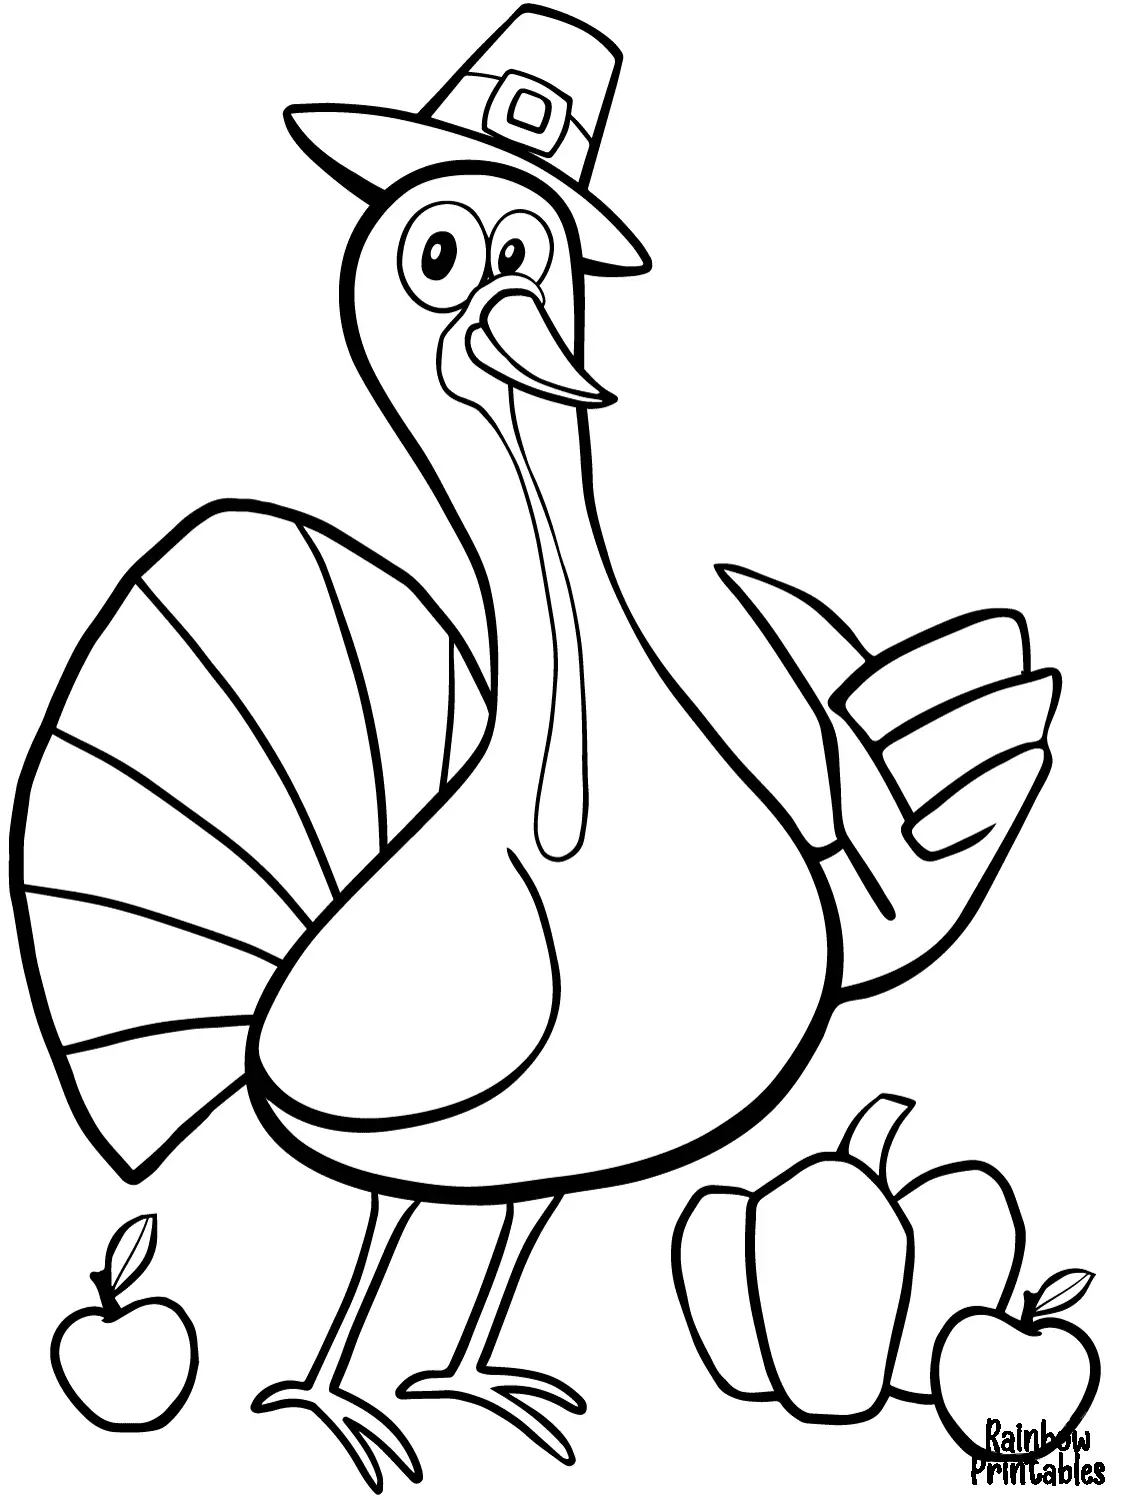 CUTE THUMBS UP TURKEY ANIMAL Clipart Coloring Pages for Kids Adults Art Activities Line Art